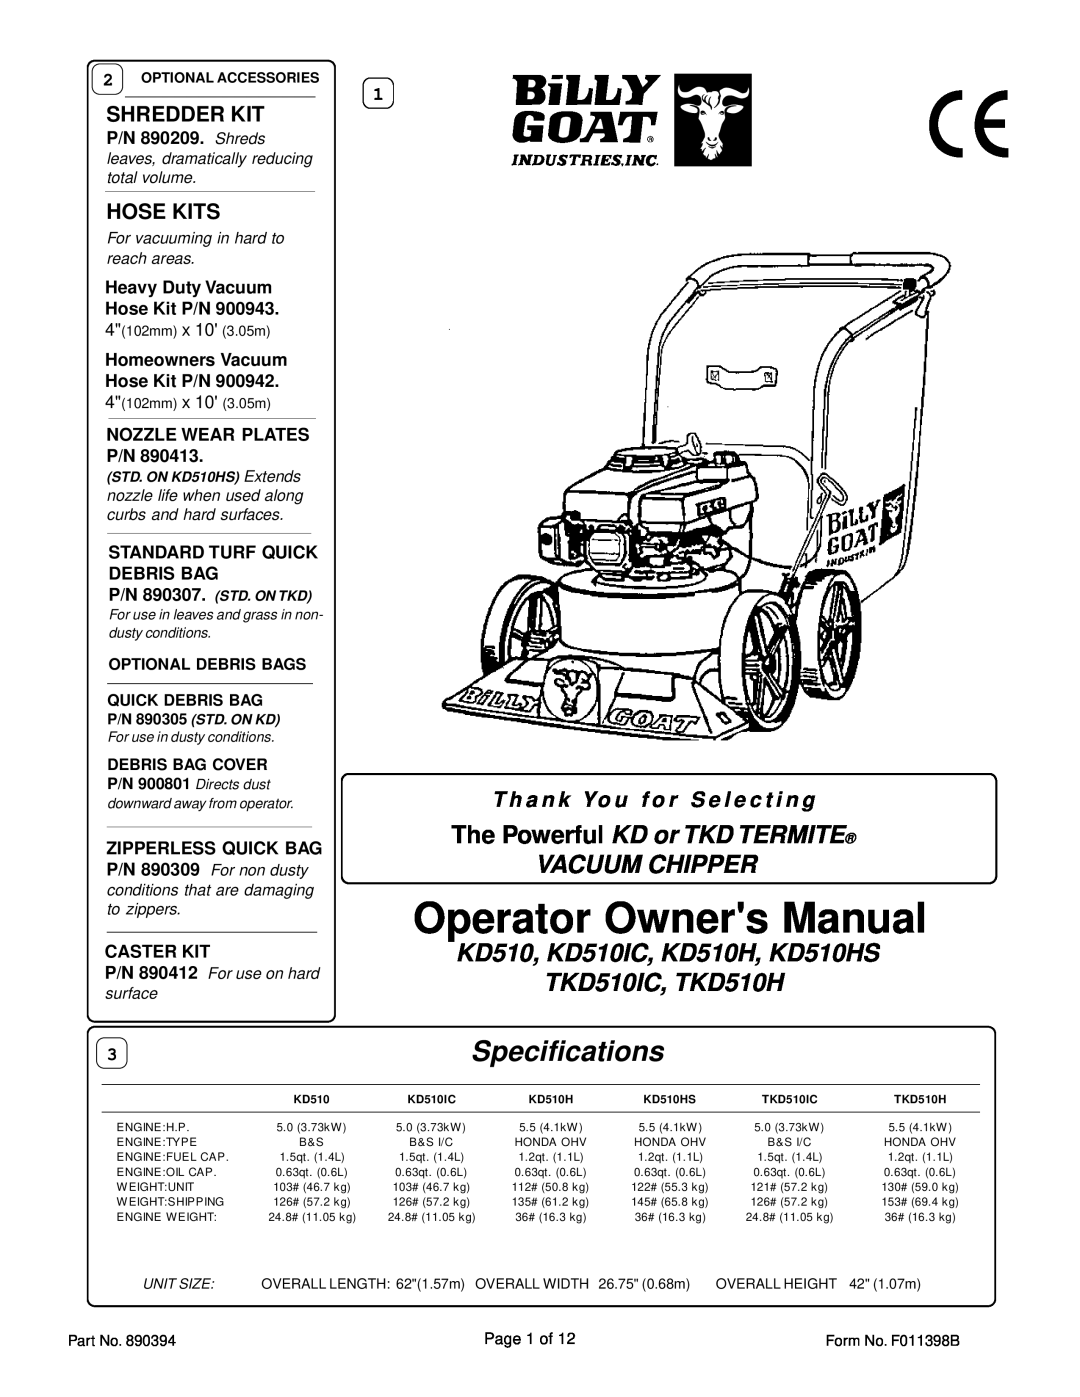 Billy Goat KD510 specifications The Powerful KD or TKD TERMITE VACUUM CHIPPER, Shredder Kit, Hose Kits, P/N 890209. Shreds 